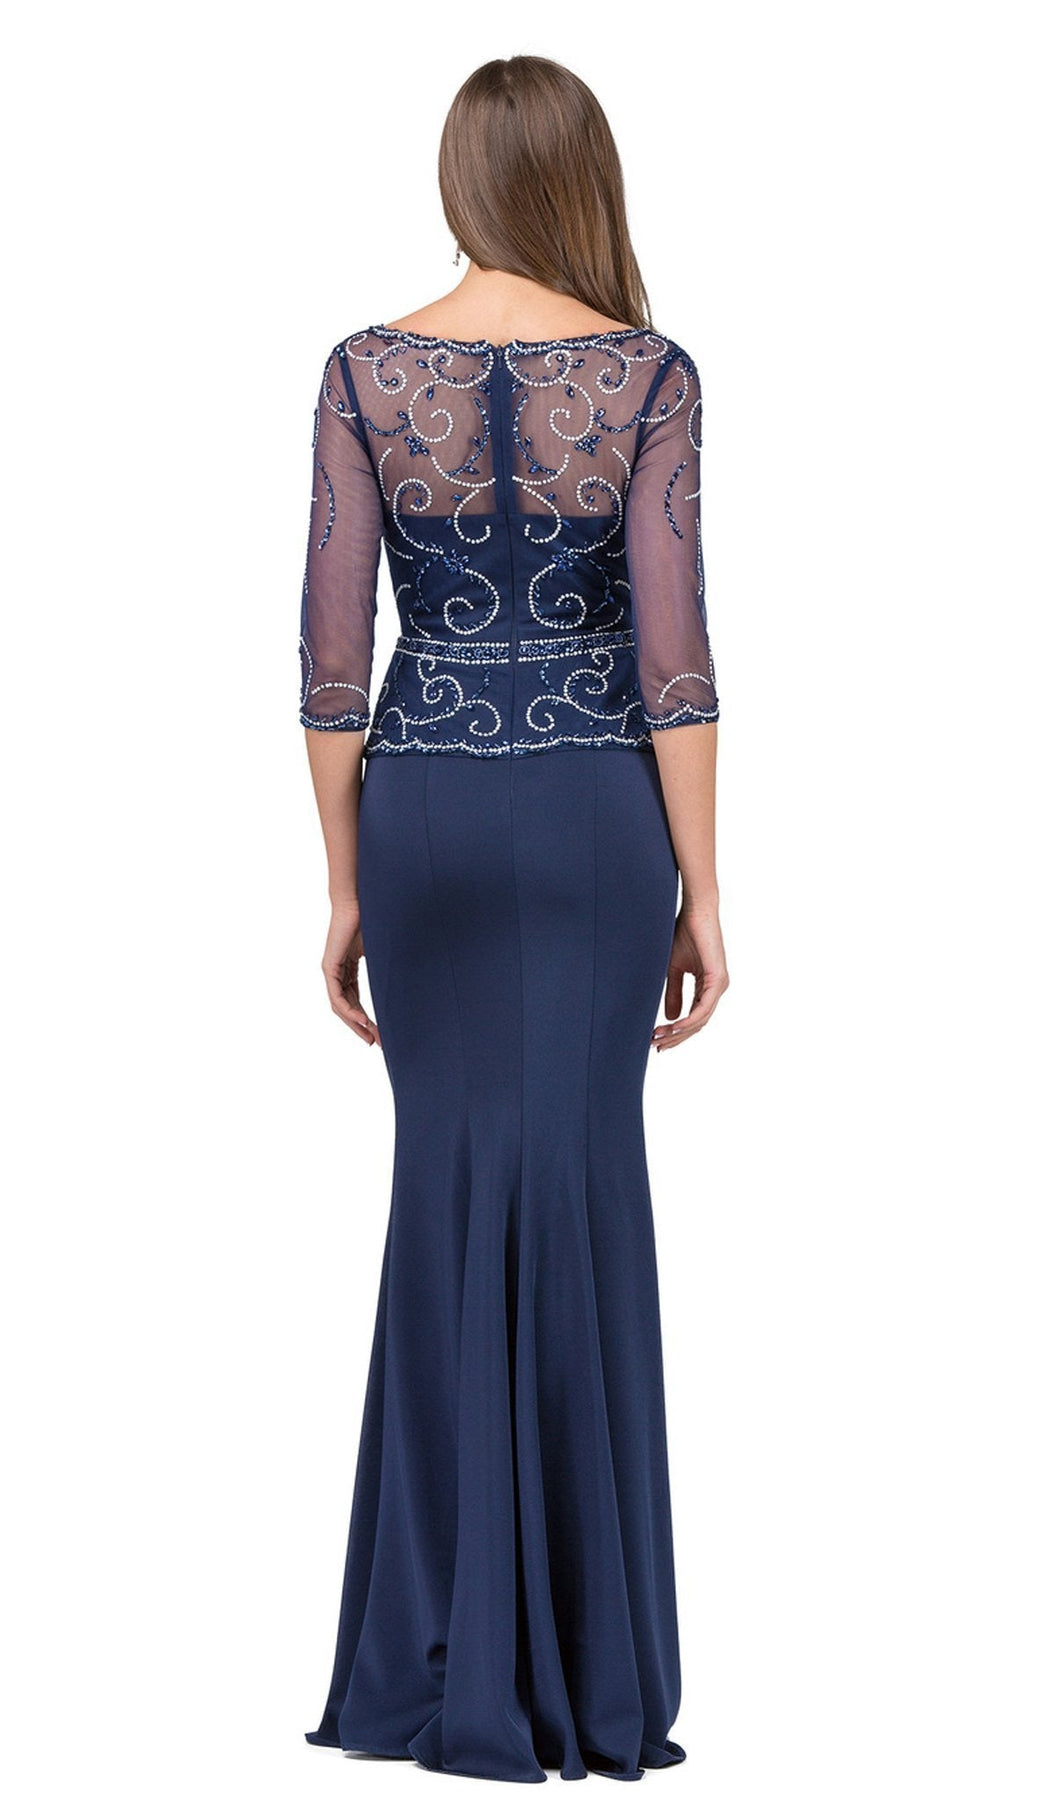 Dancing Queen - 2290 Beaded Sheer Quarter Length Sleeve Sheath Prom Dress Special Occasion Dress S / Navy